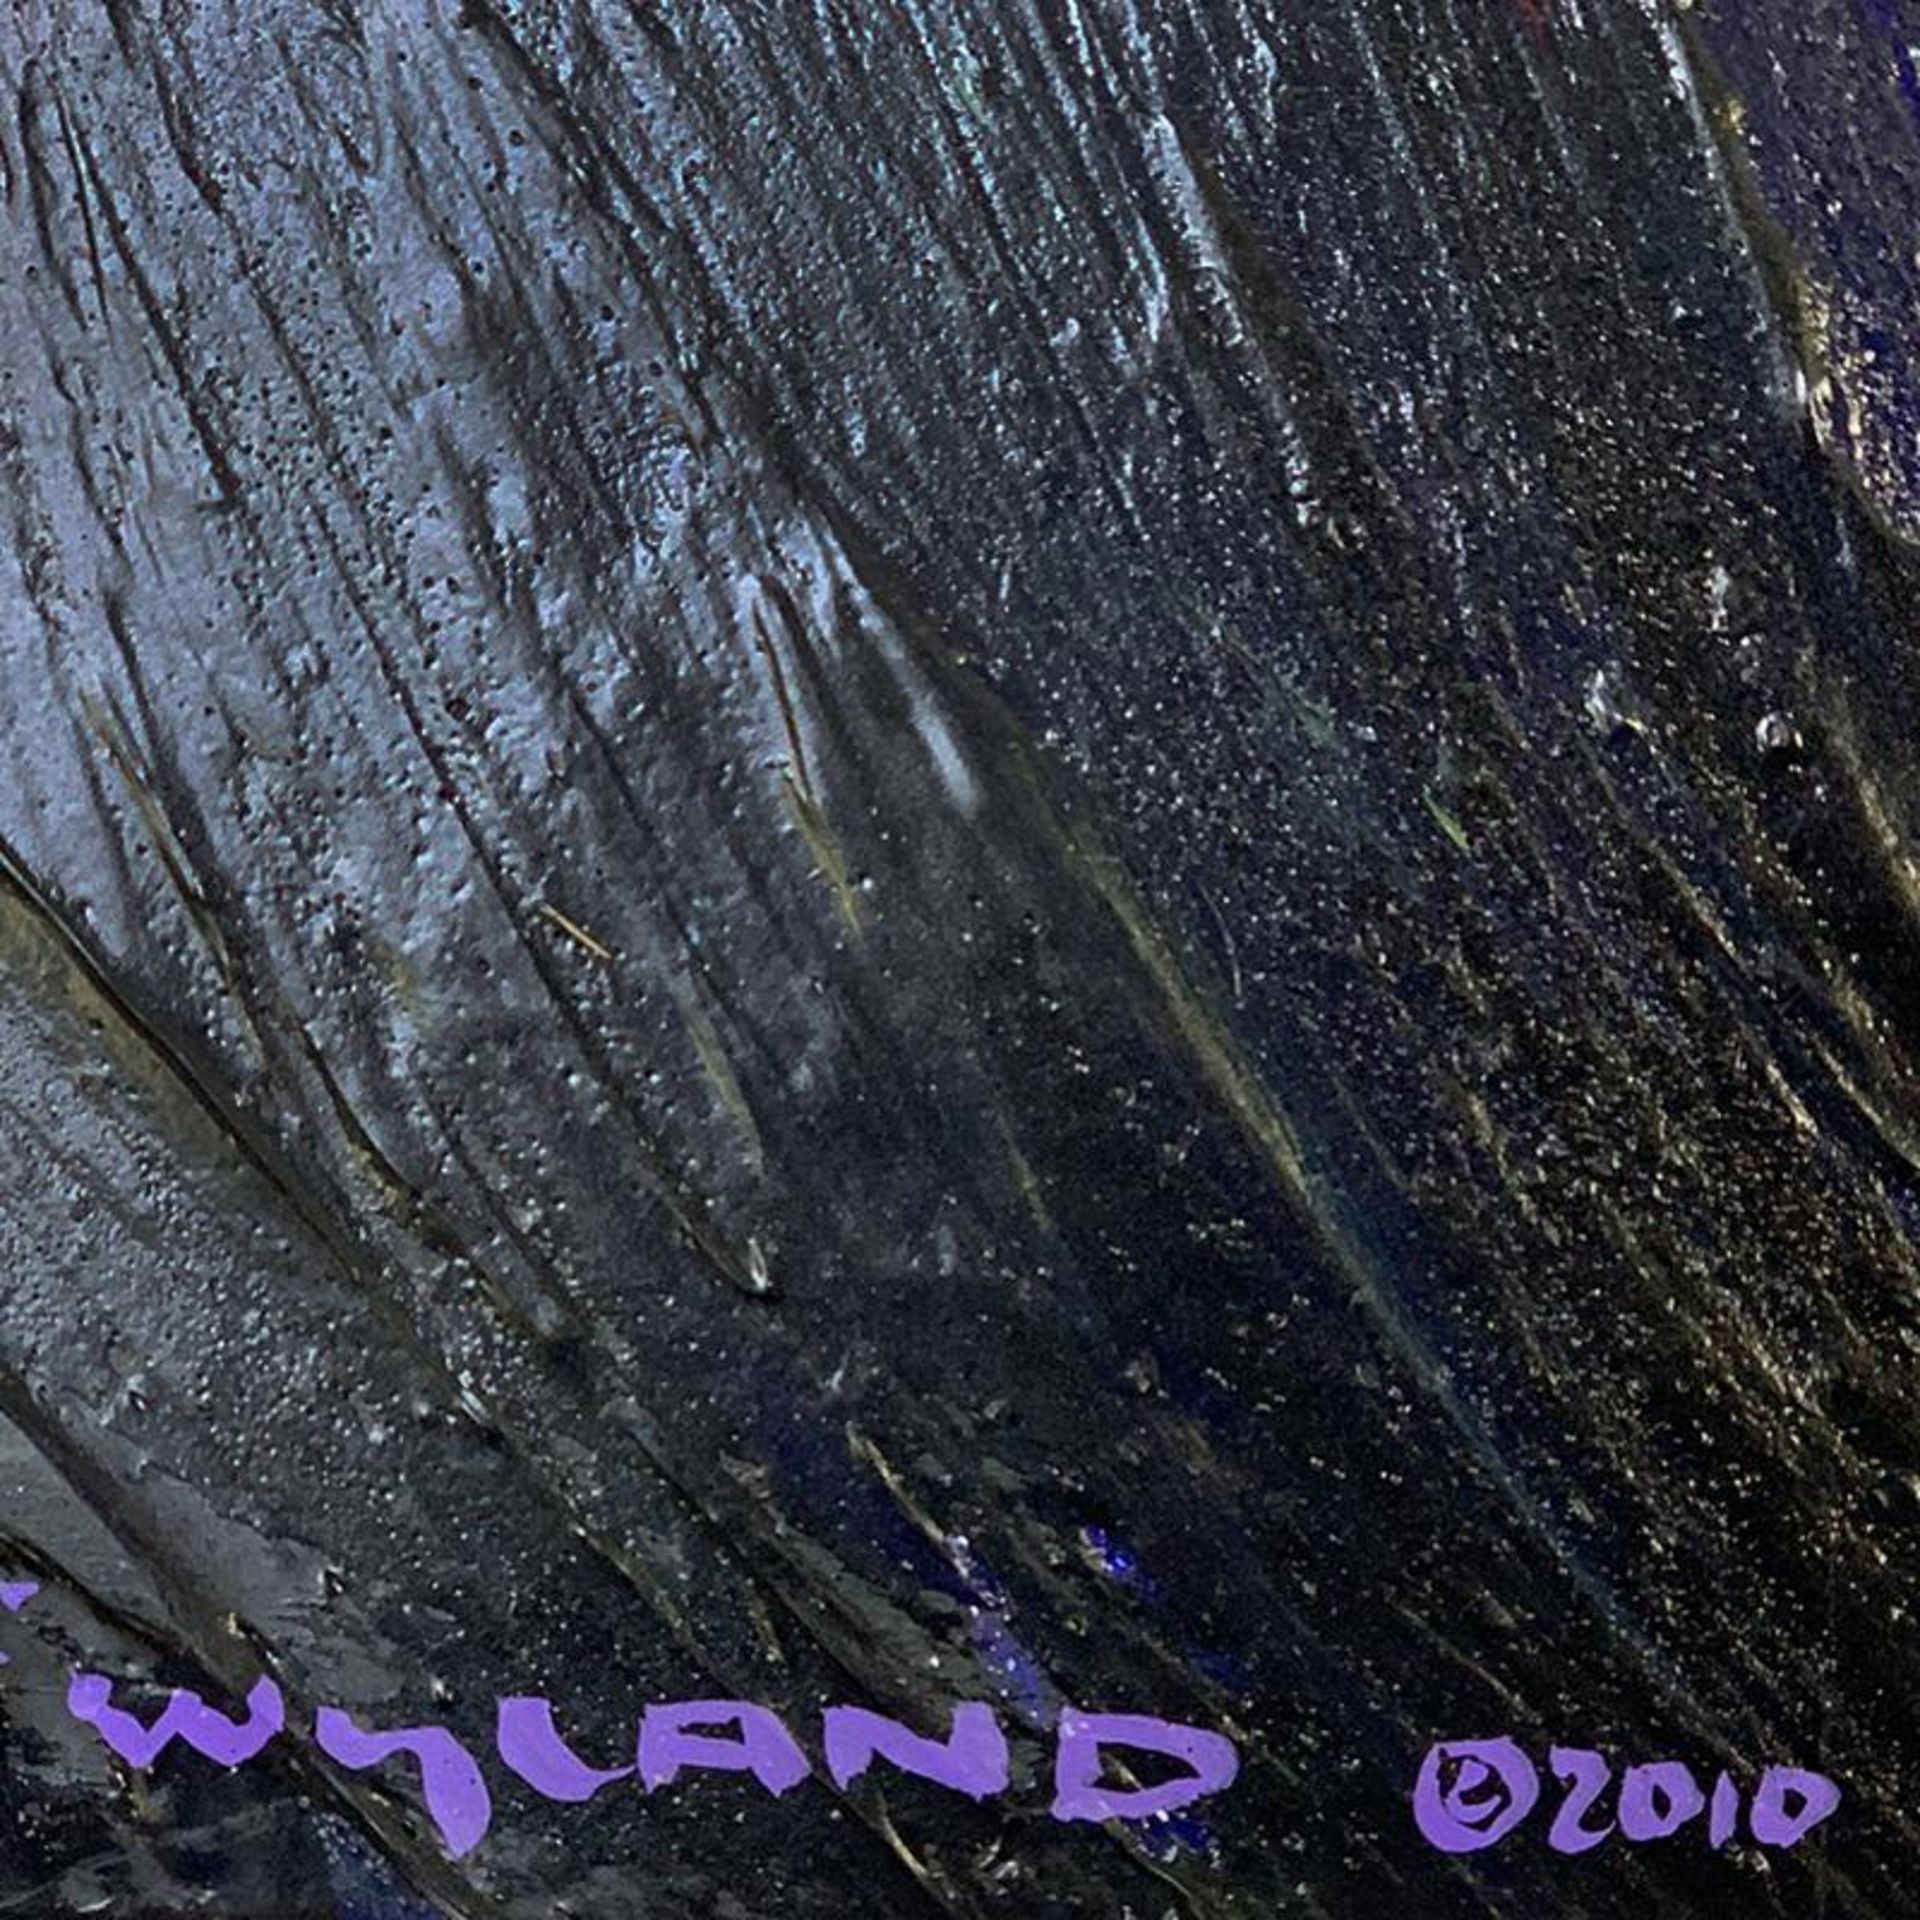 Abstract Waters by Wyland Original - Image 2 of 2